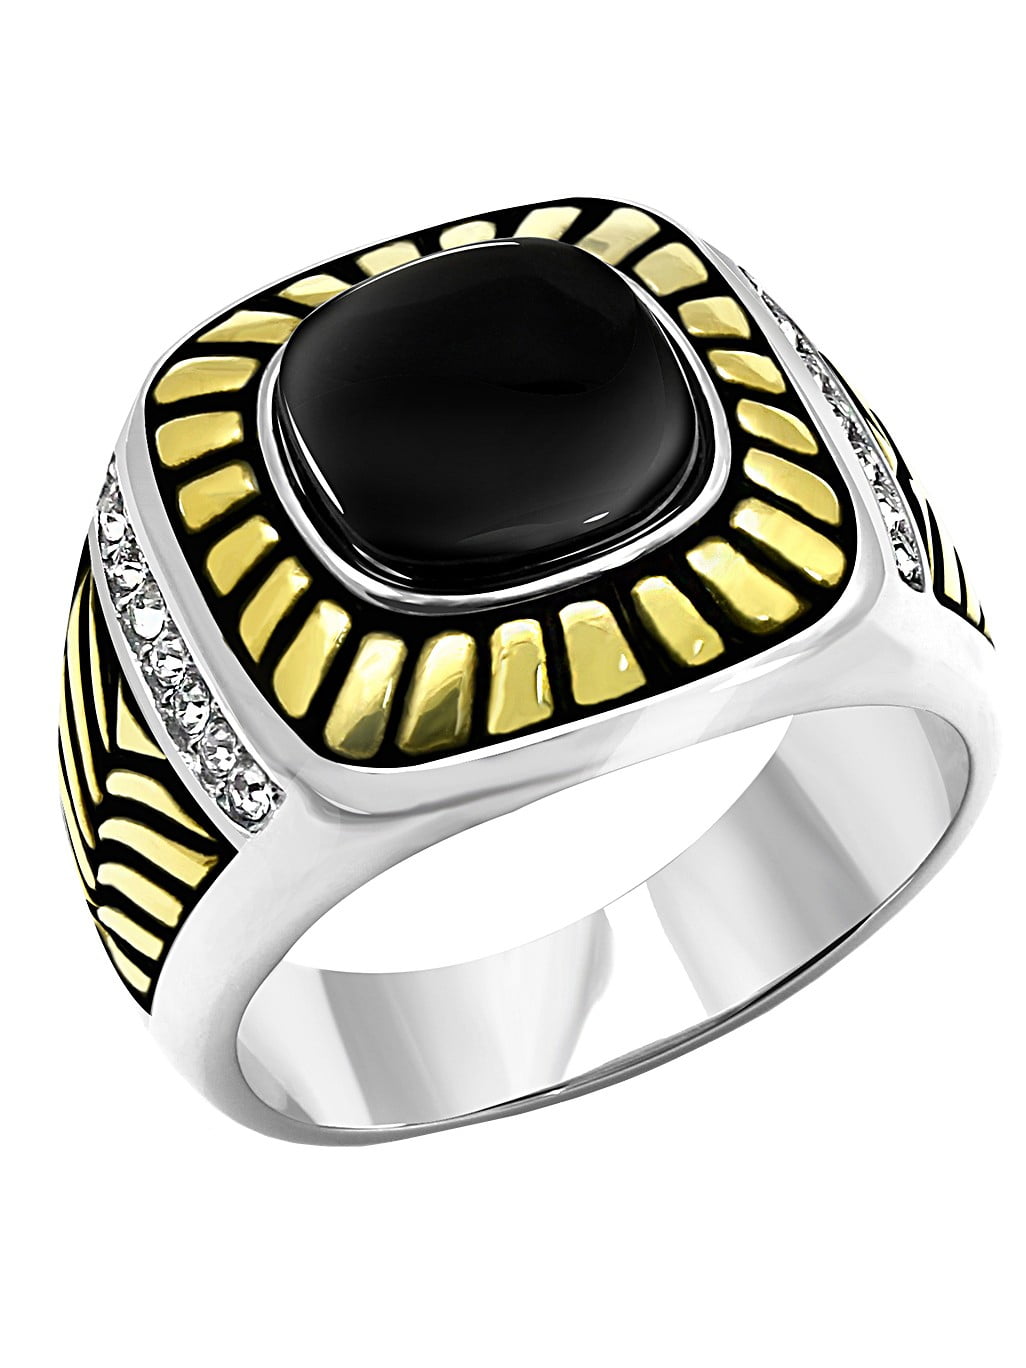 Synthetic Tiger Eye Center with Top Crystal Set in Gold IP Stainless Steel Ring 